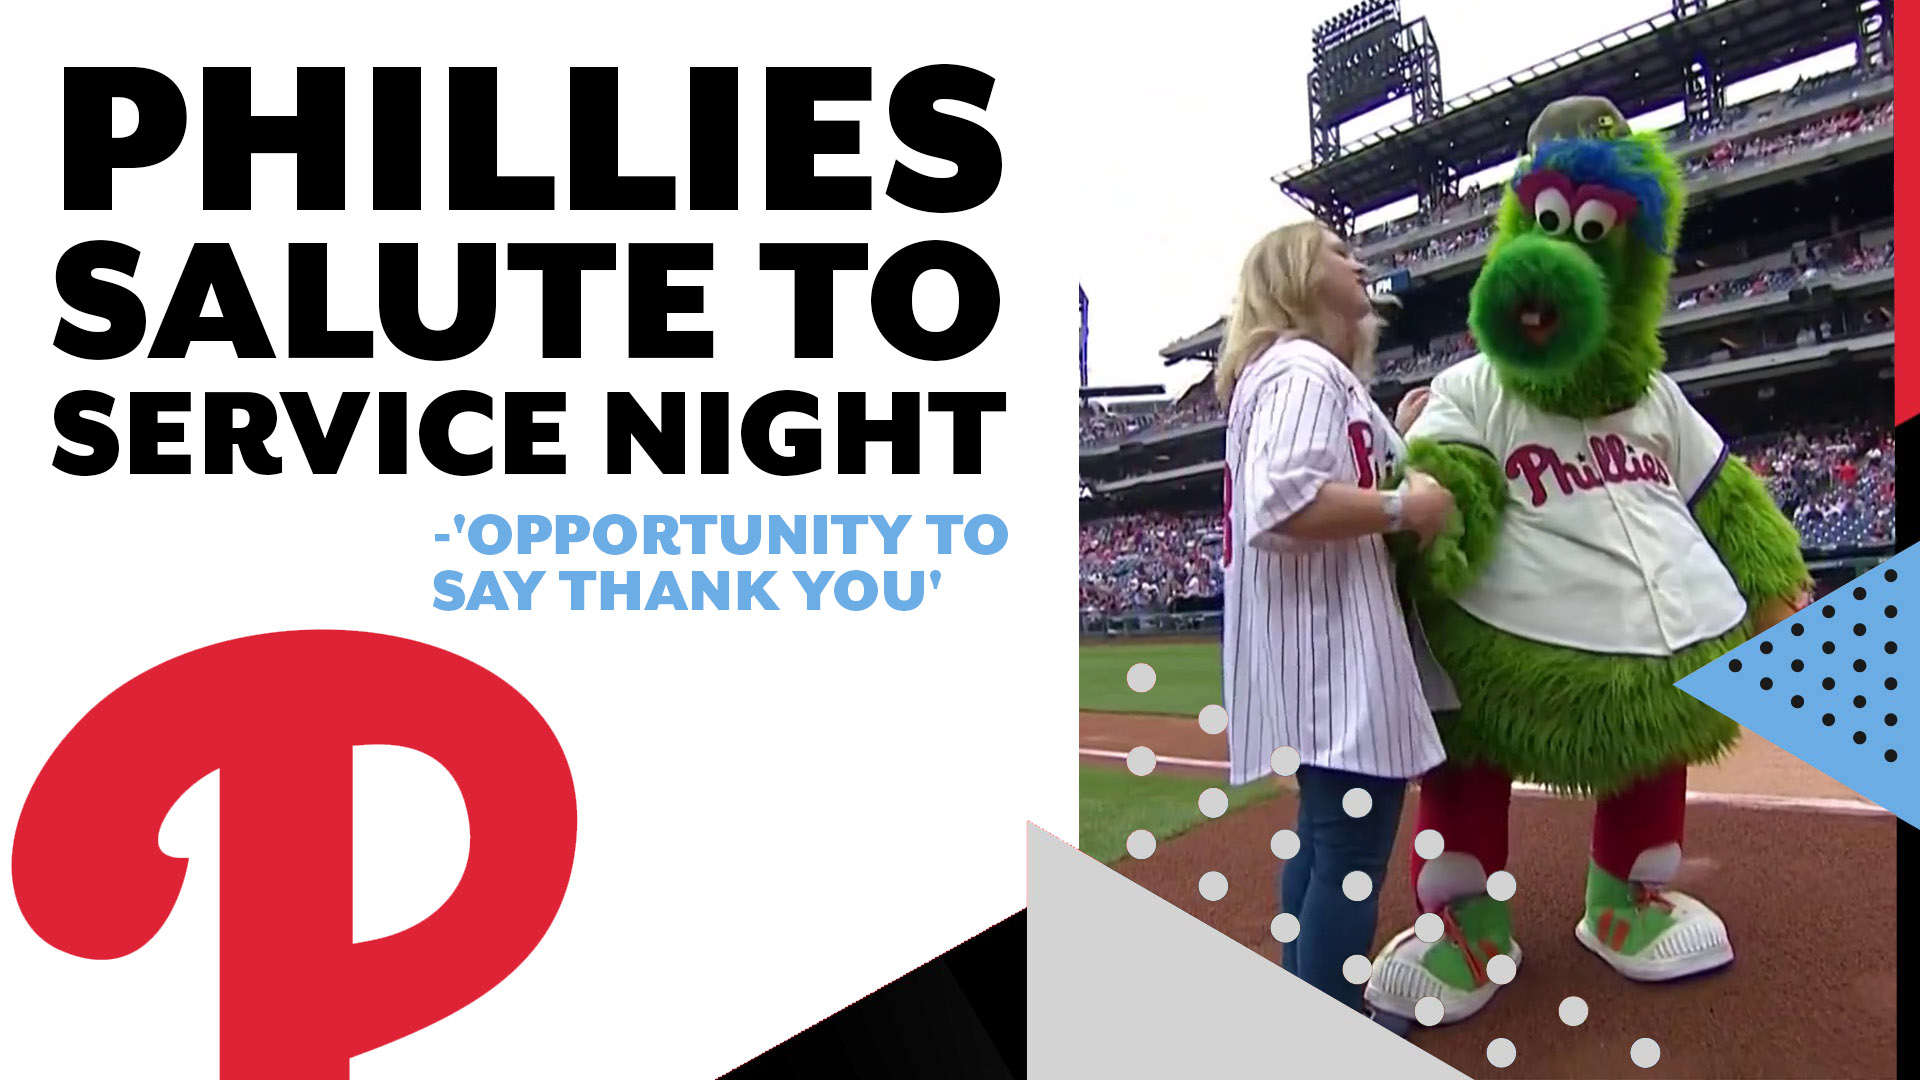 Phillies' Salute to Service Night is an 'opportunity to say thank